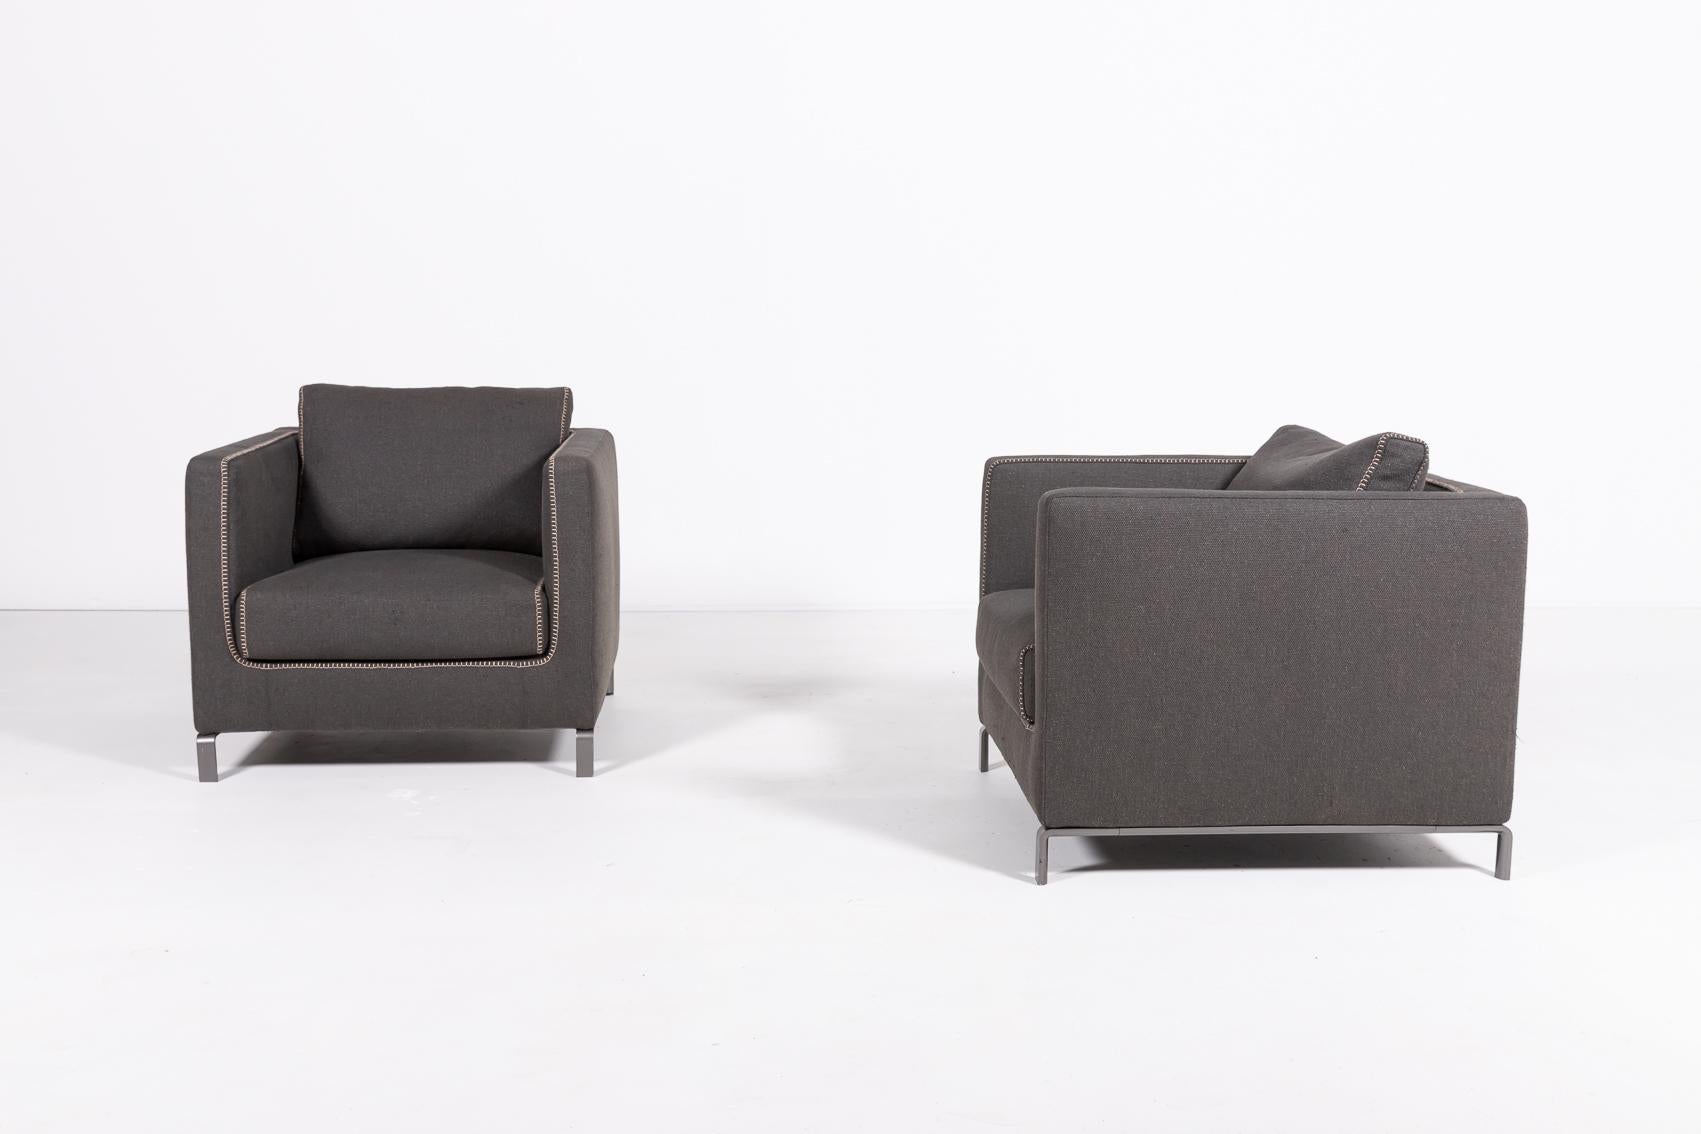 Pair of beautiful armchairs in grey wool upholstery from B&B Italia from award-winning designer Antonio Citterio.

A successful design strategy that achieves a balance of functional and aesthetic features. It stands out for the tailoring detail of